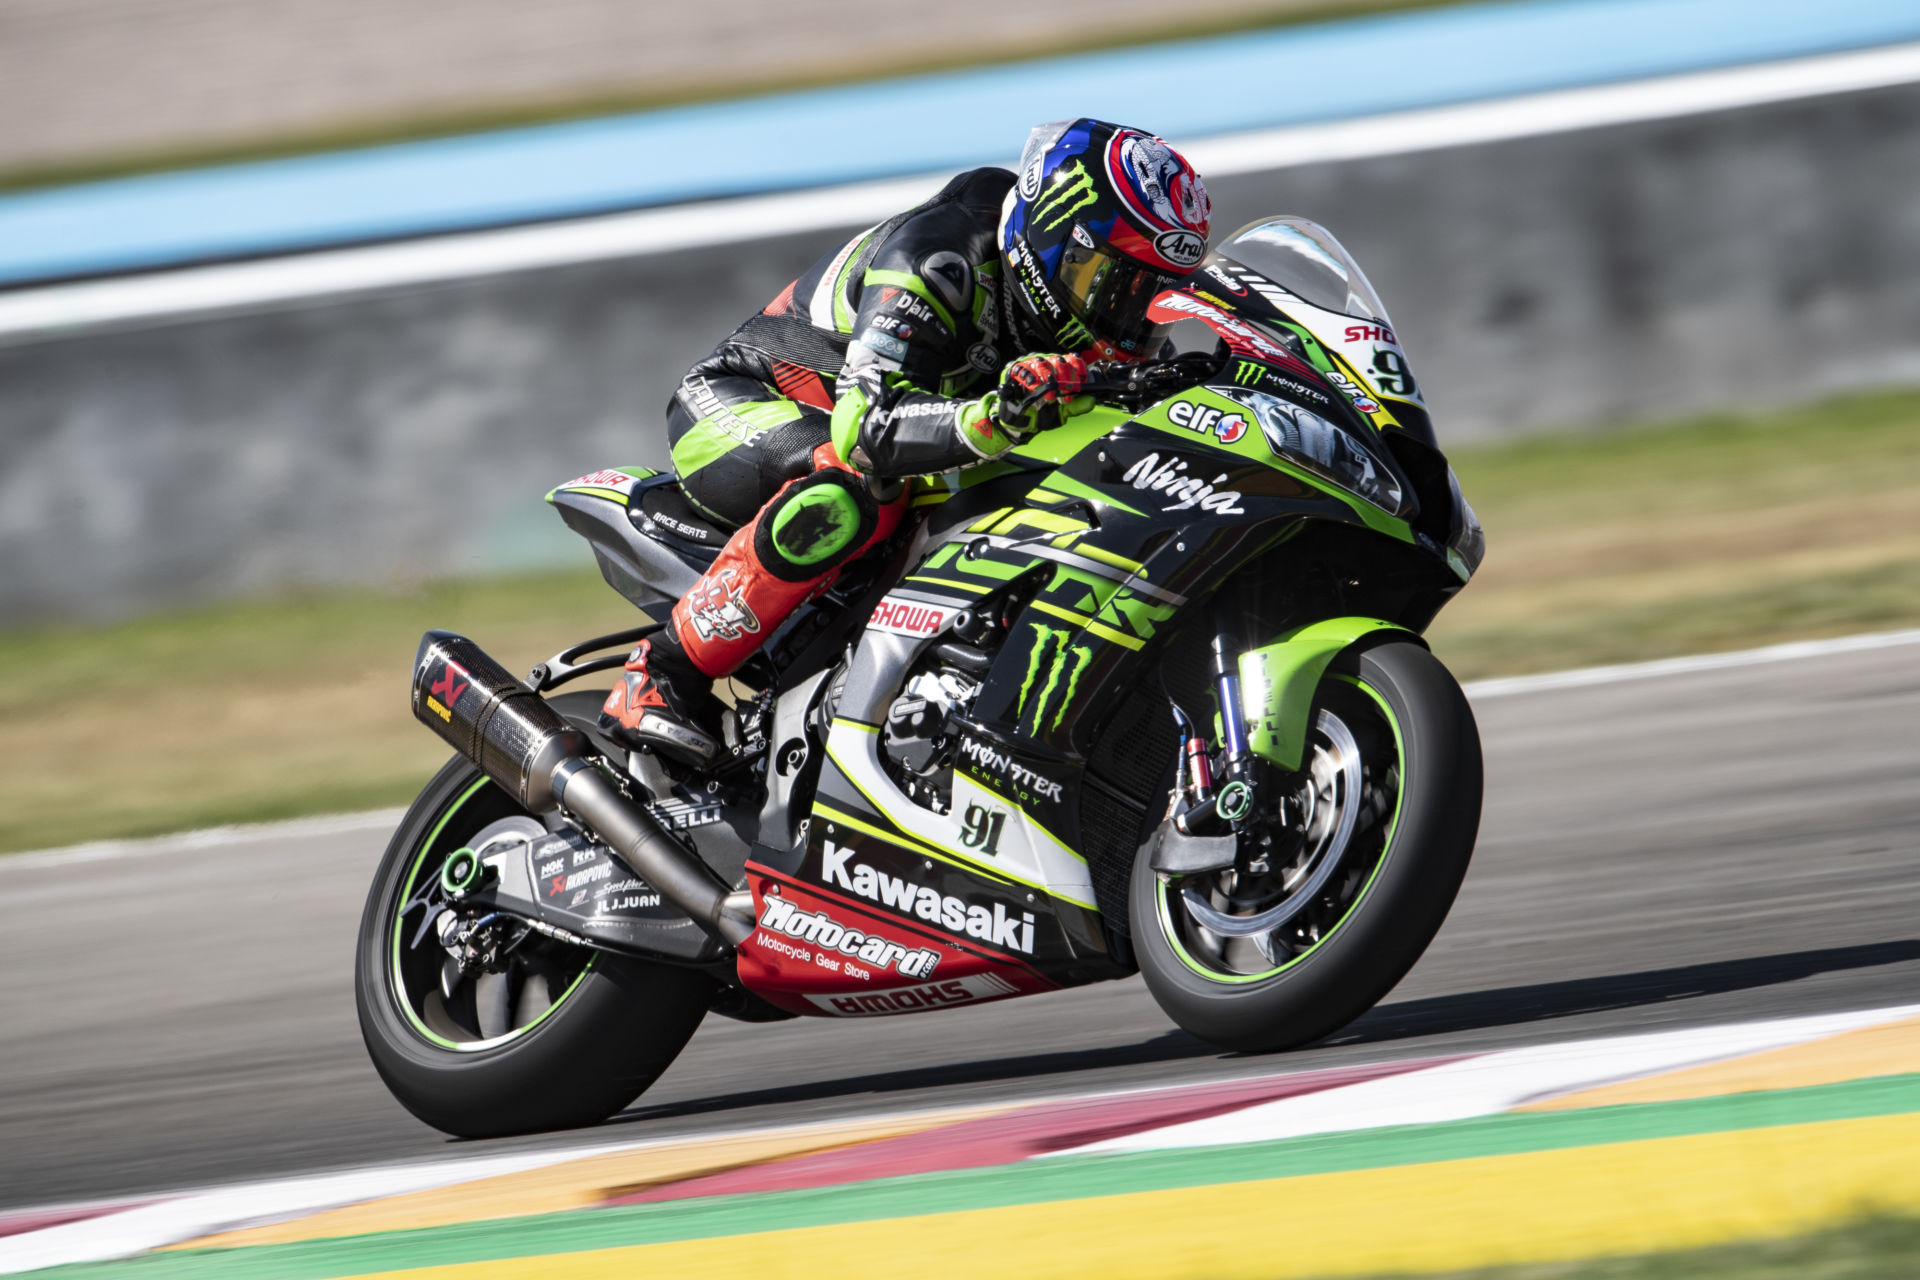 World Superbike: Leon Haslam Says Long Front Straightaway Could Be A Factor This Coming Weekend - Roadracing World Magazine | Riding, Racing & Tech News